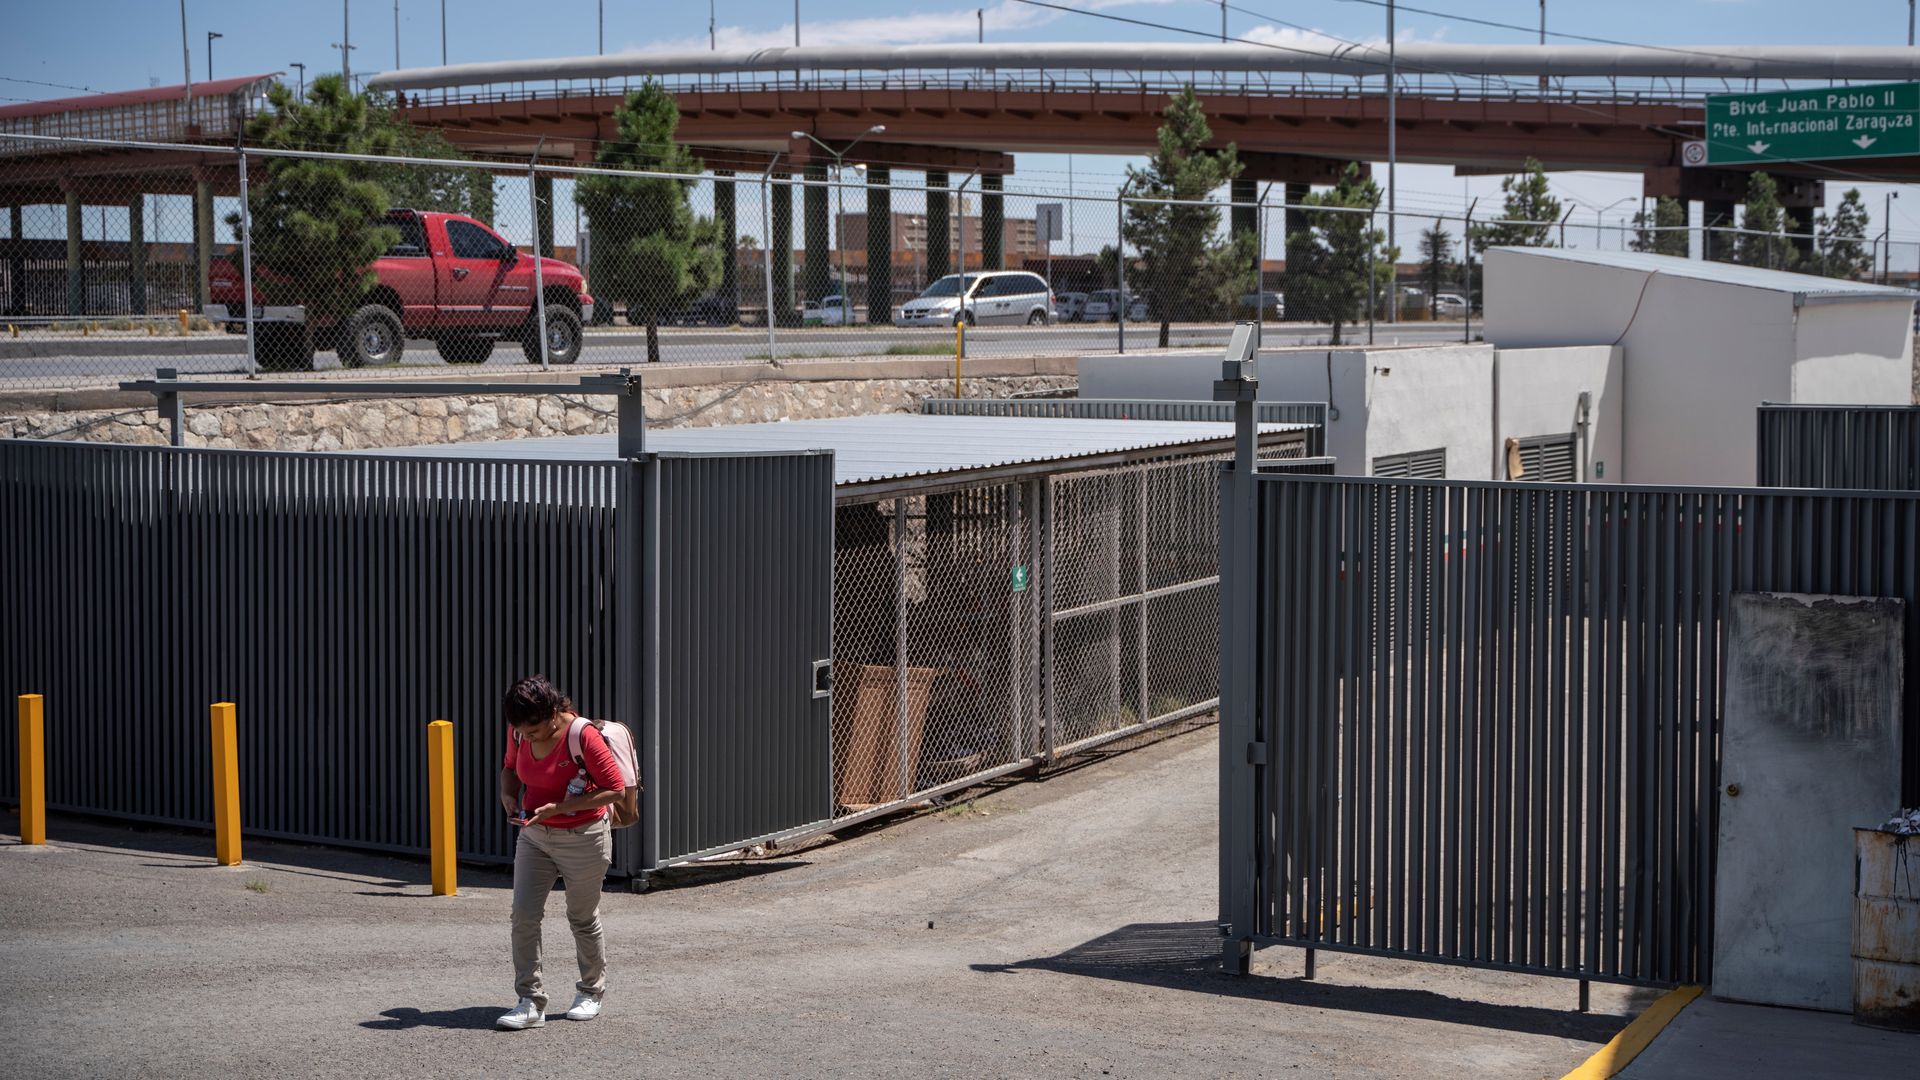 This image shows a child walking out of a detention center.